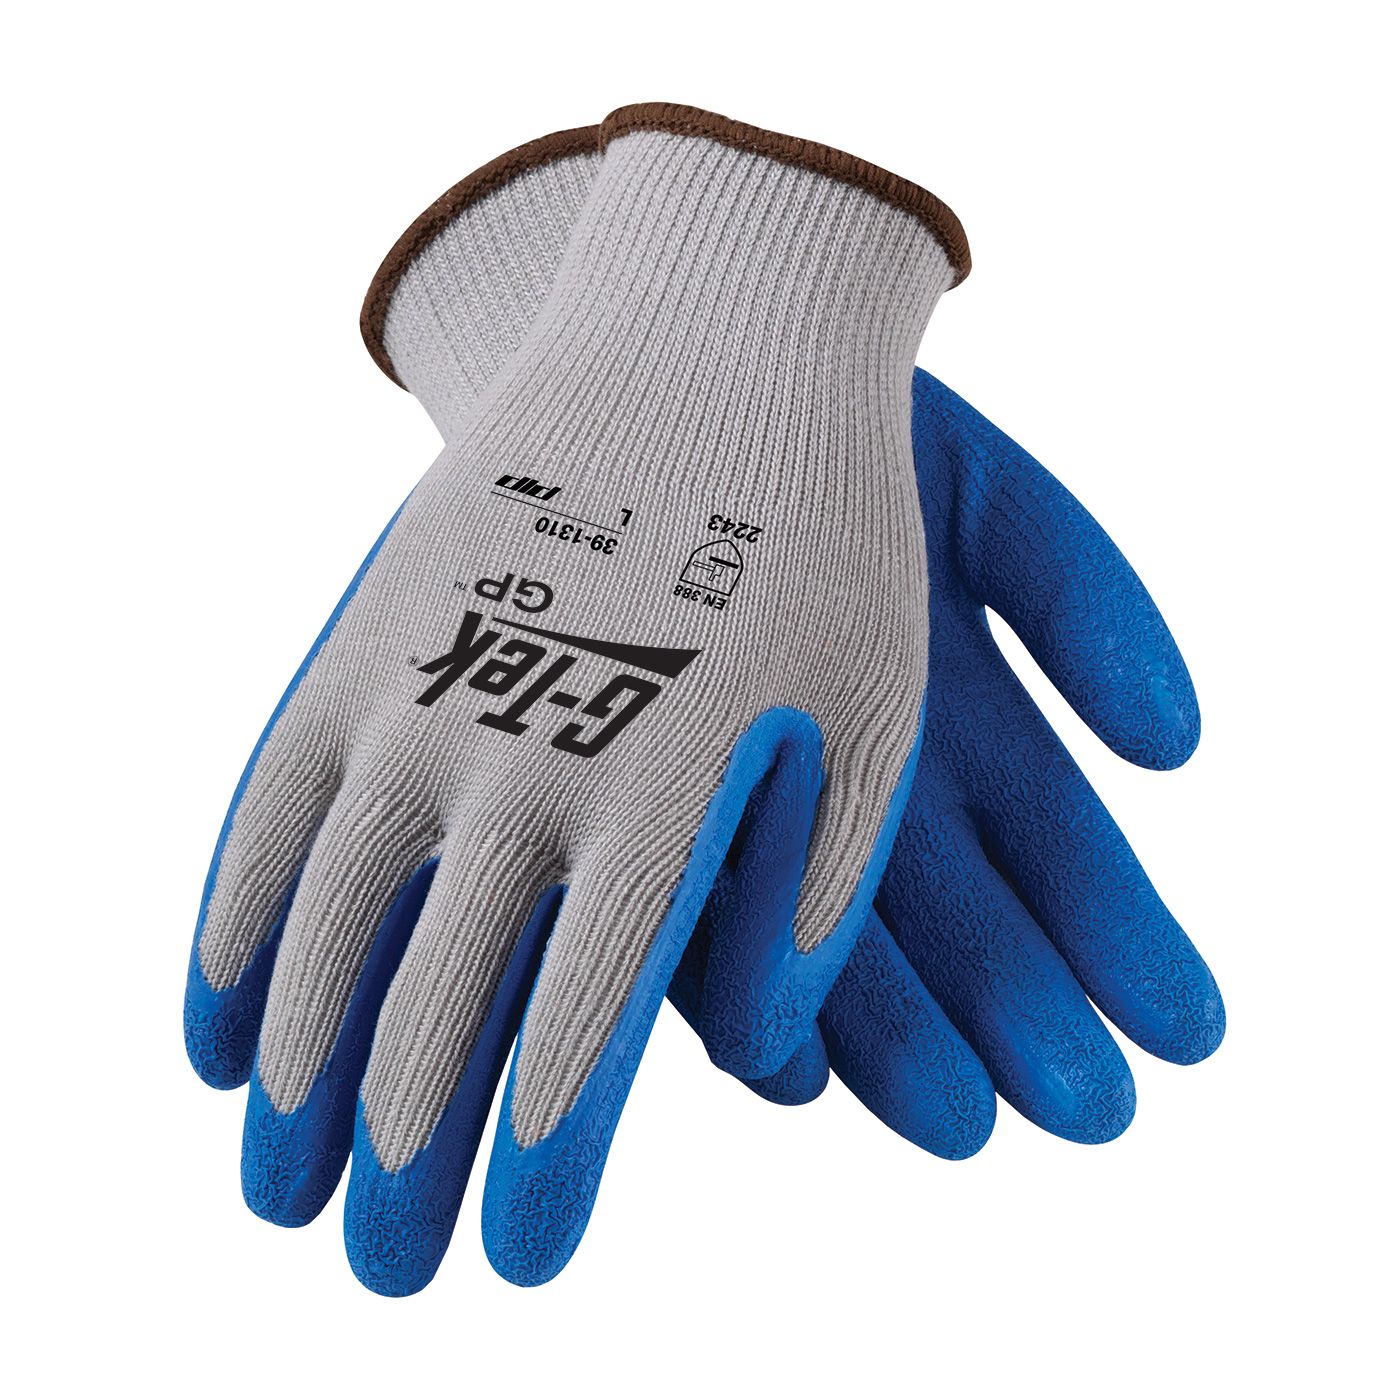 PIP 39-1310 Seamless Knit with Coated Crinkle Grip Work Glove - Gray Color 12 Pairs